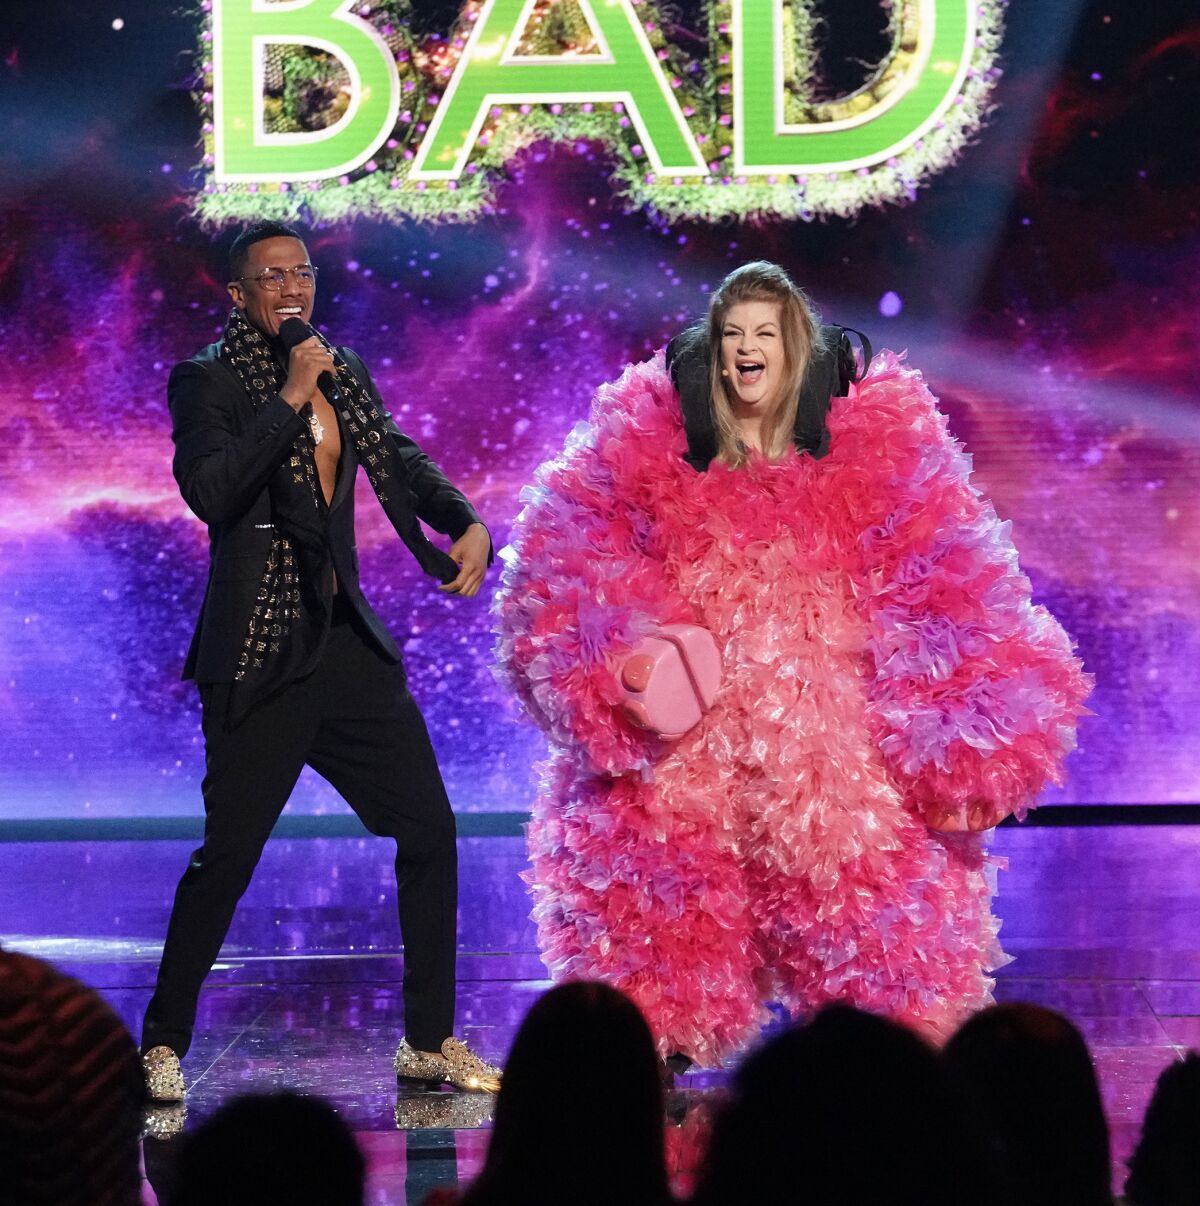 A man with a microphone stands on stage next to a woman in a fluffy pink costume